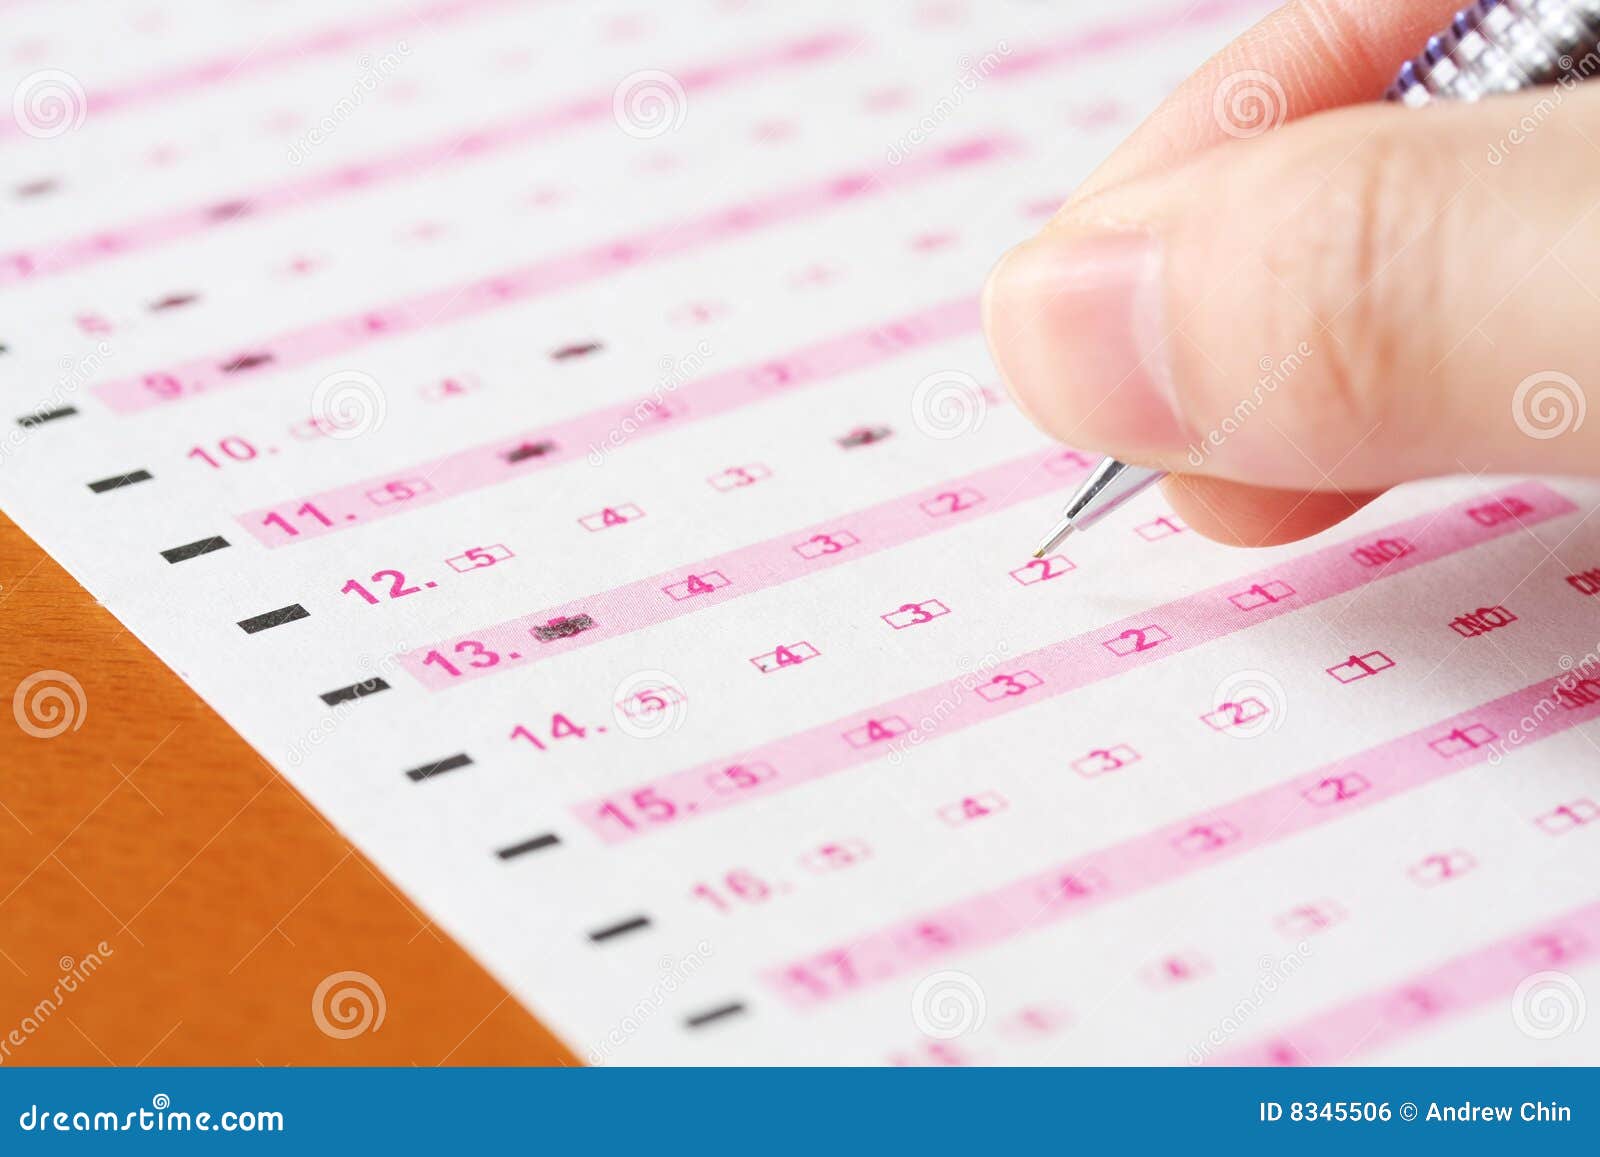 Filling Out Survey Royalty Free Stock Image - Image: 8345506